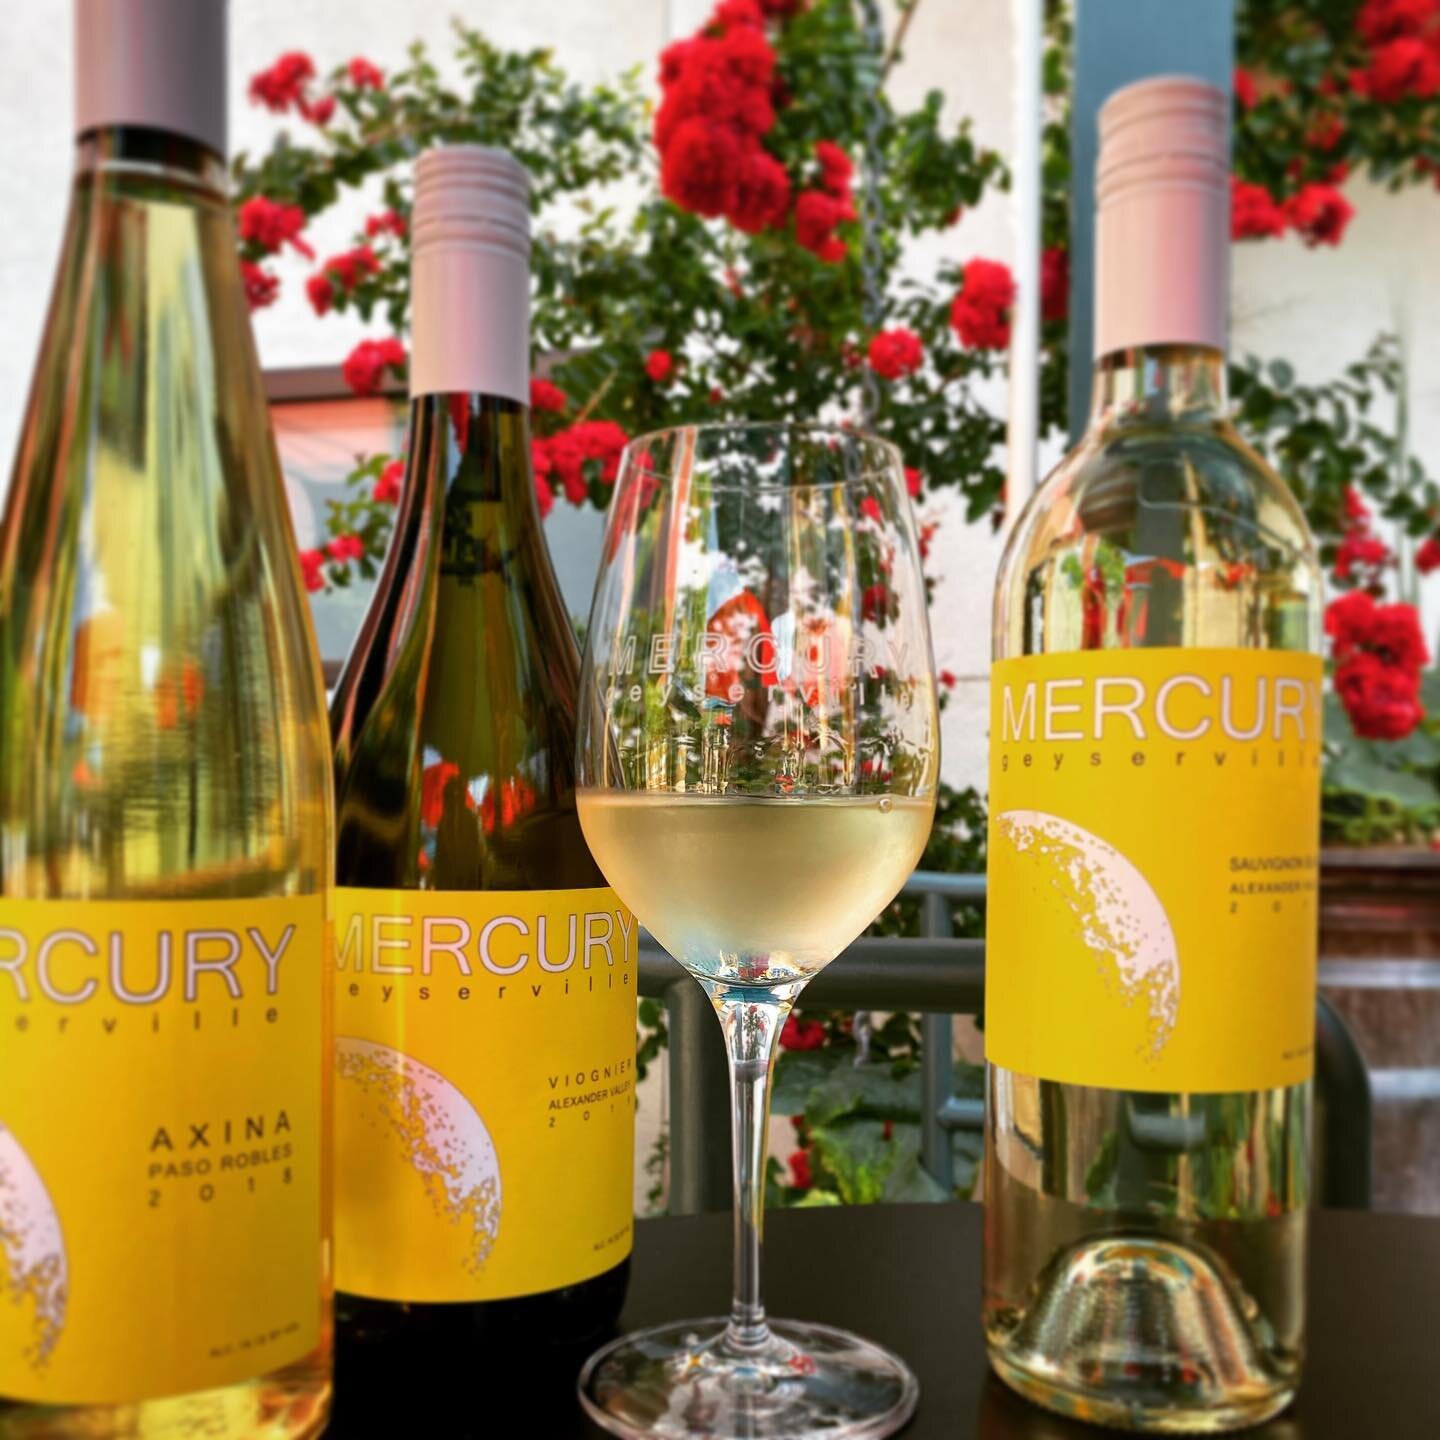 When summer brings the heat, we&rsquo;ve got the coolers you need!  It will be Phoenix hot this weekend, so we&rsquo;ve limited our outdoor tastings to just the morning... but you can swing by and grab your wine to enjoy at home! We&rsquo;ll also be 